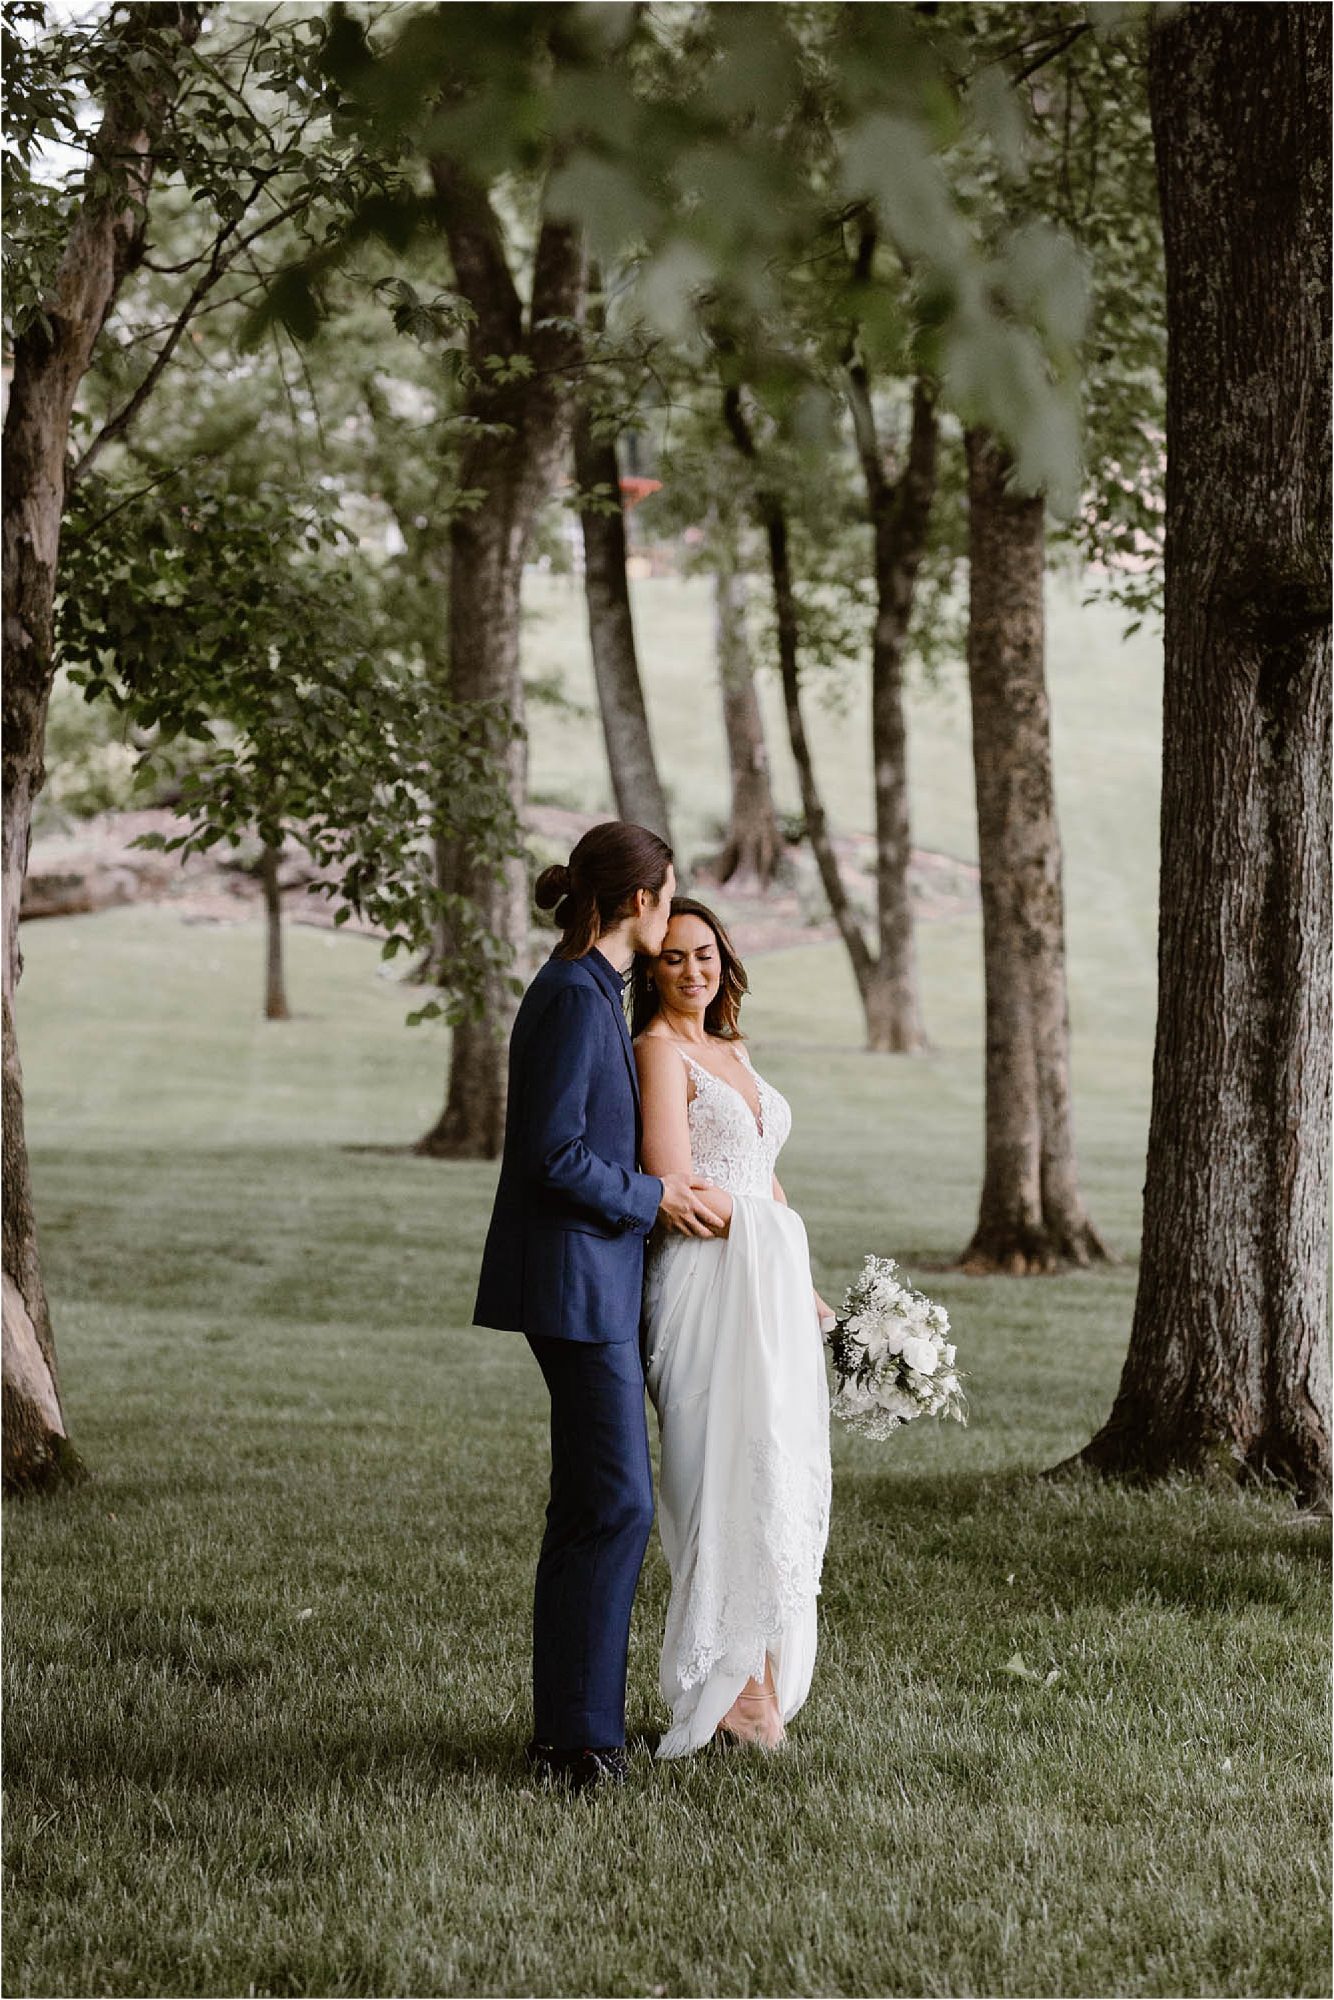 photos of bride and groom in backyard